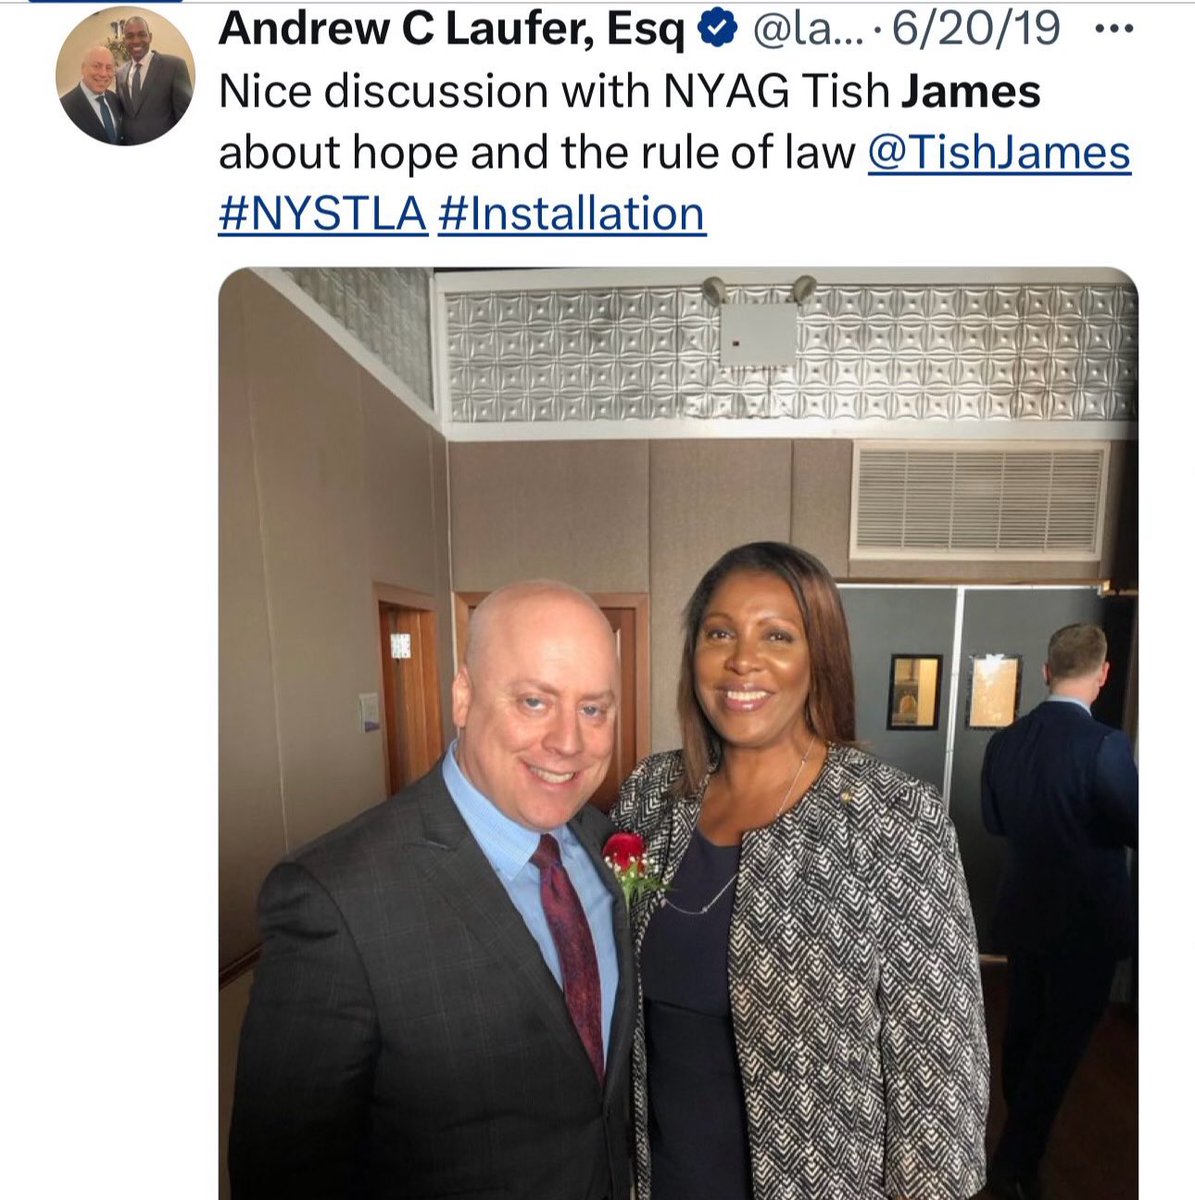 WOW!!!! Here is Andrew Laufer @lauferlaw, who is @MichaelCohen212’s lawyer saying that NY Attorney General @TishJames is “going to own Trump” with RICO. Trump’s trial is set to begin in NYC tomorrow, April 15, and @MichaelCohen212 is the star witness for Alvin Bragg. Cohen’s…